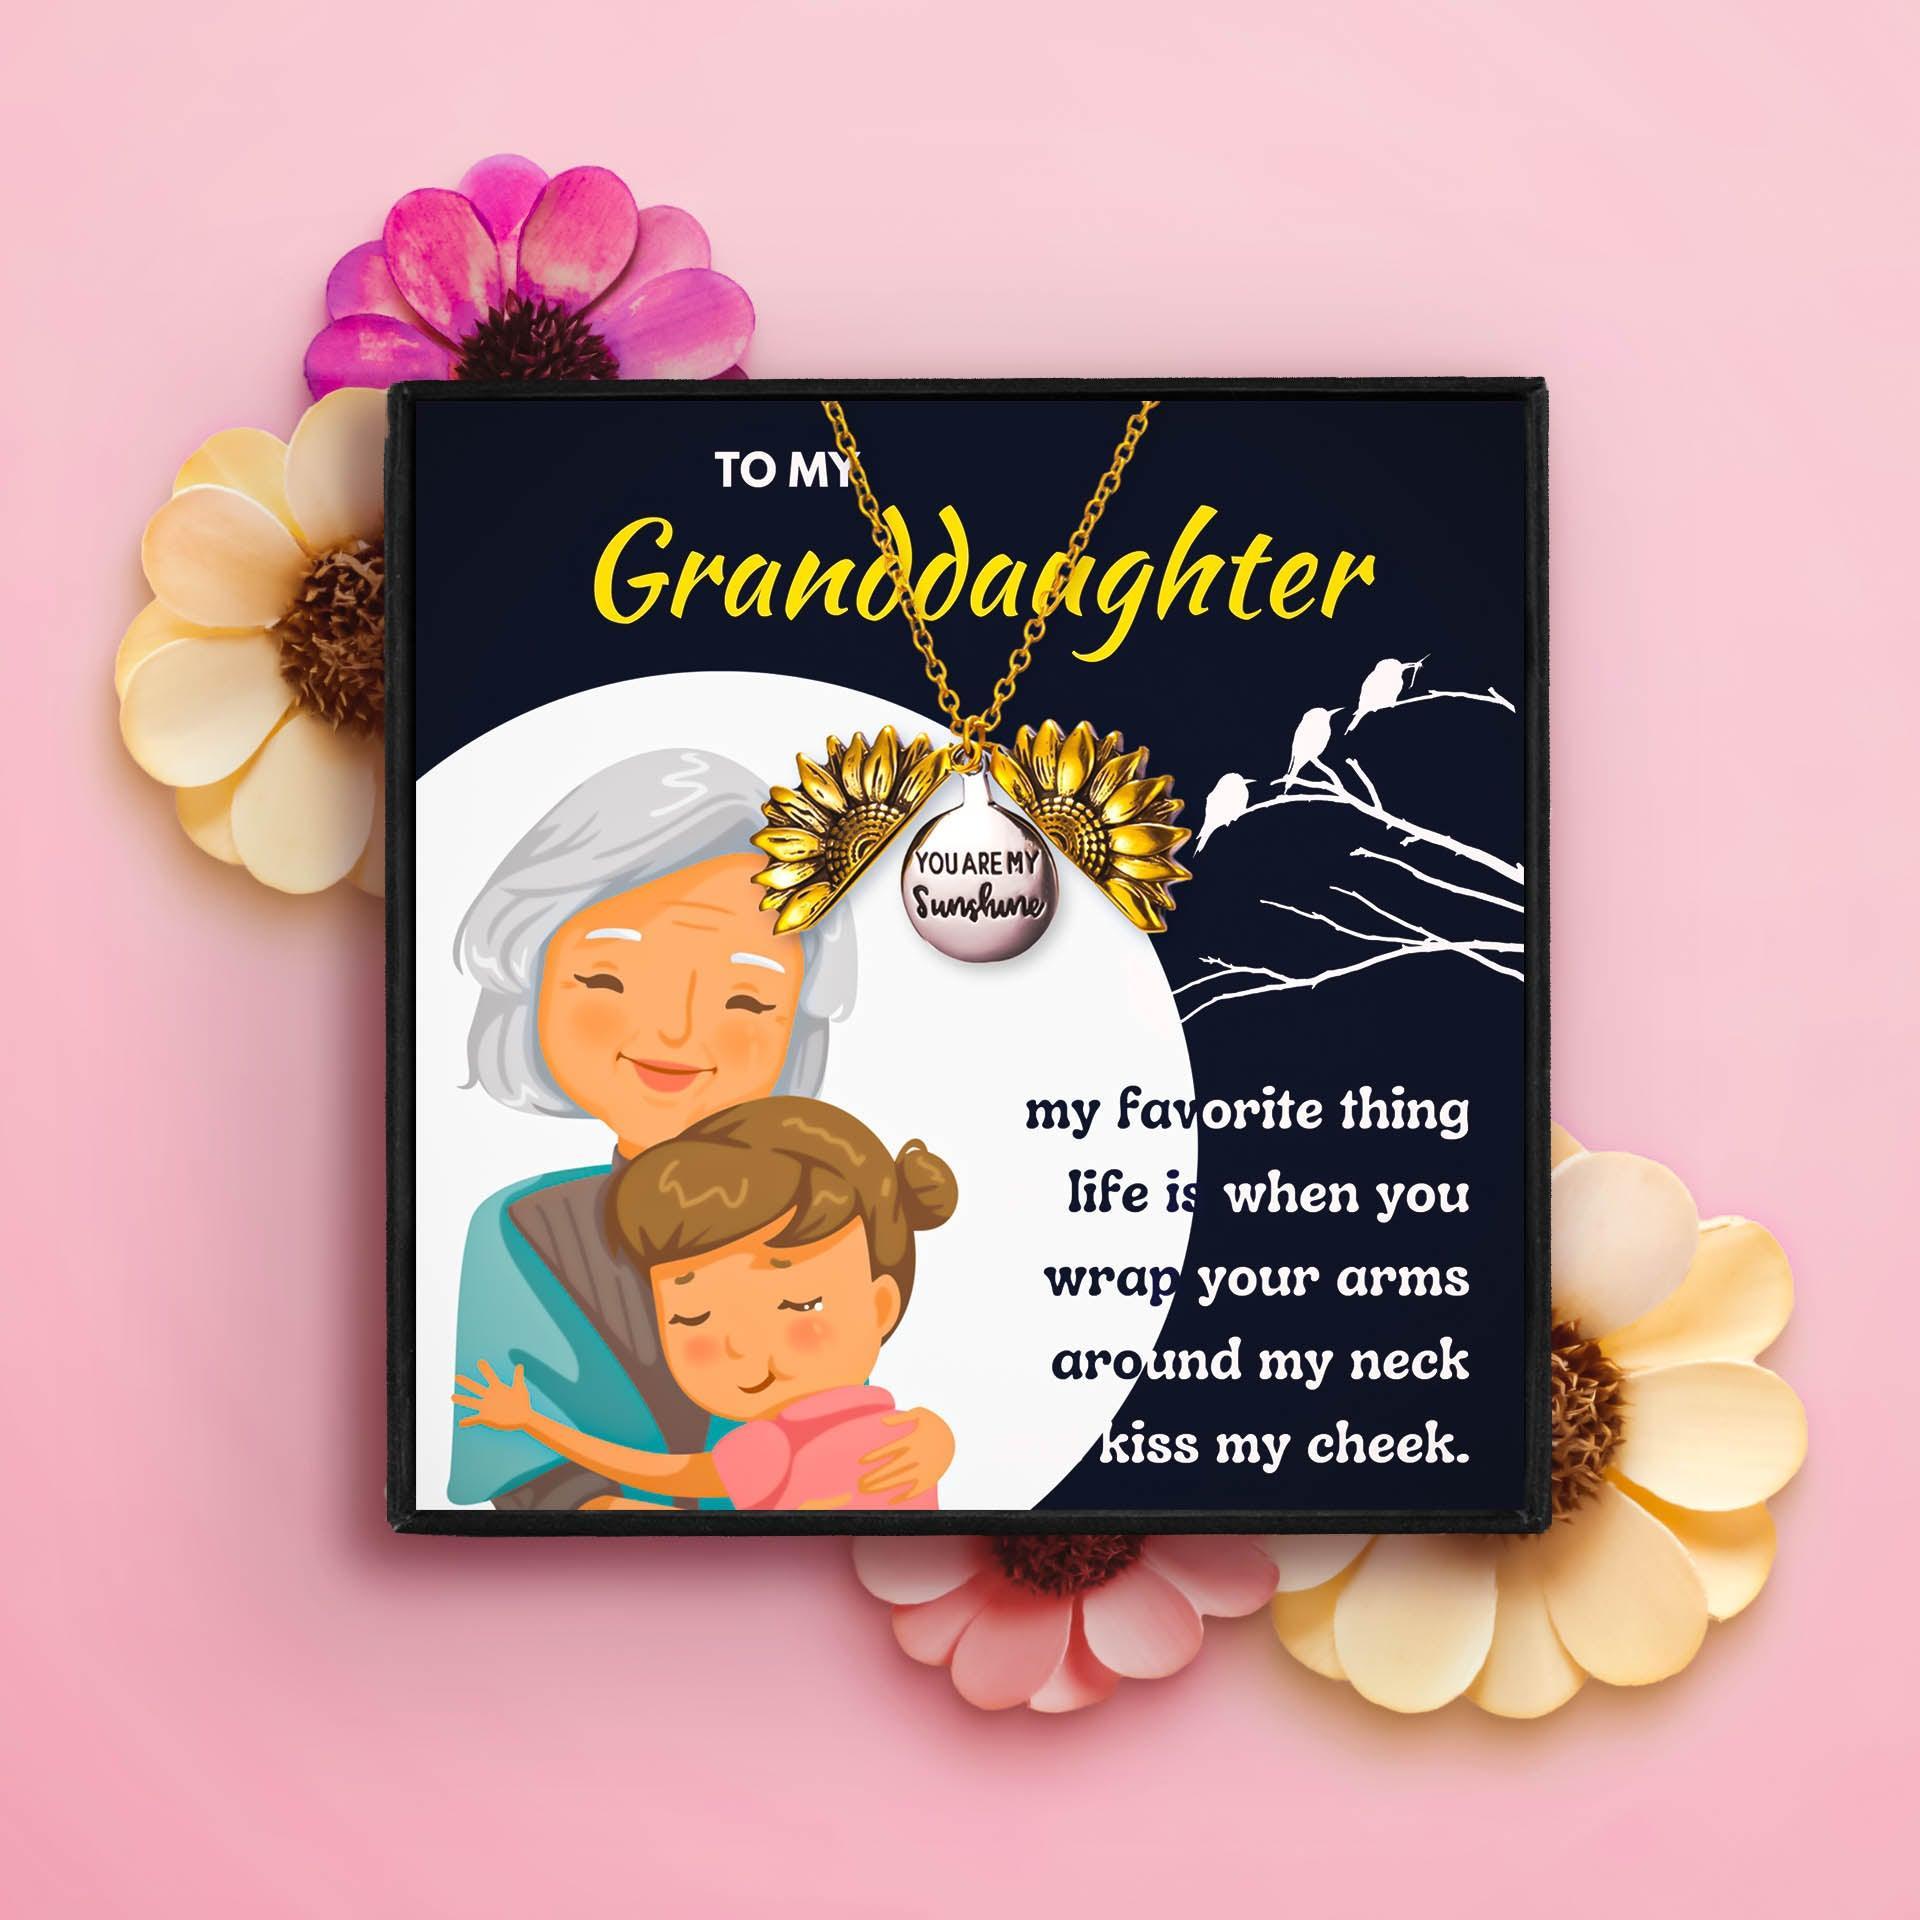 Meaningful Granddaughter Gifts From Grandparents for Christmas 2023 | Meaningful Granddaughter Gifts From Grandparents - undefined | granddaughter gift, granddaughter gifts from nana, granddaughter necklace from grandma, grandma granddaughter necklace, personalized granddaughter jewelry, to my granddaughter necklace | From Hunny Life | hunnylife.com